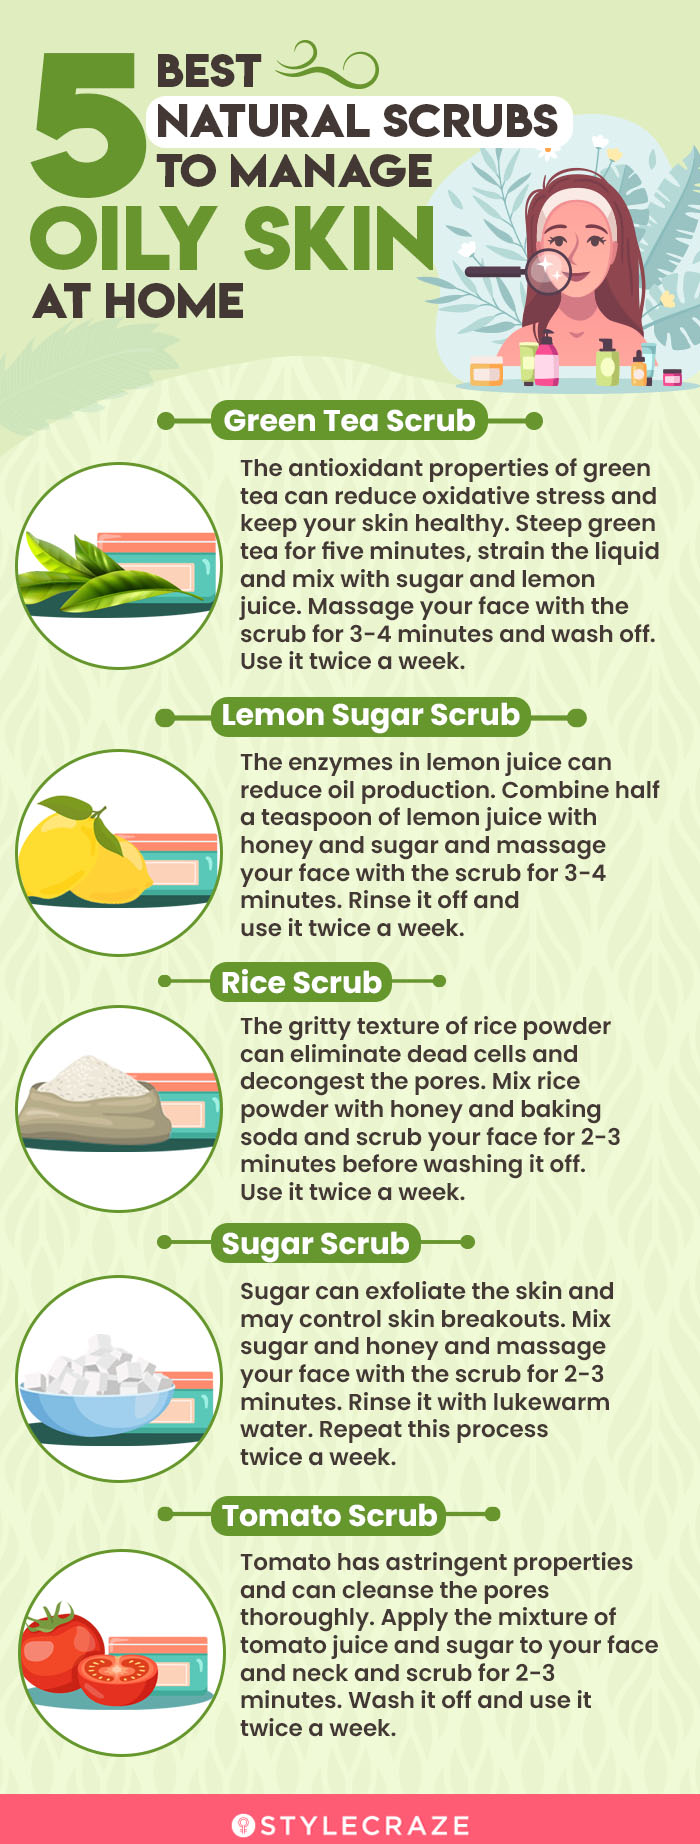 5 best natural scrubs to manage oily skin at home (infographic)